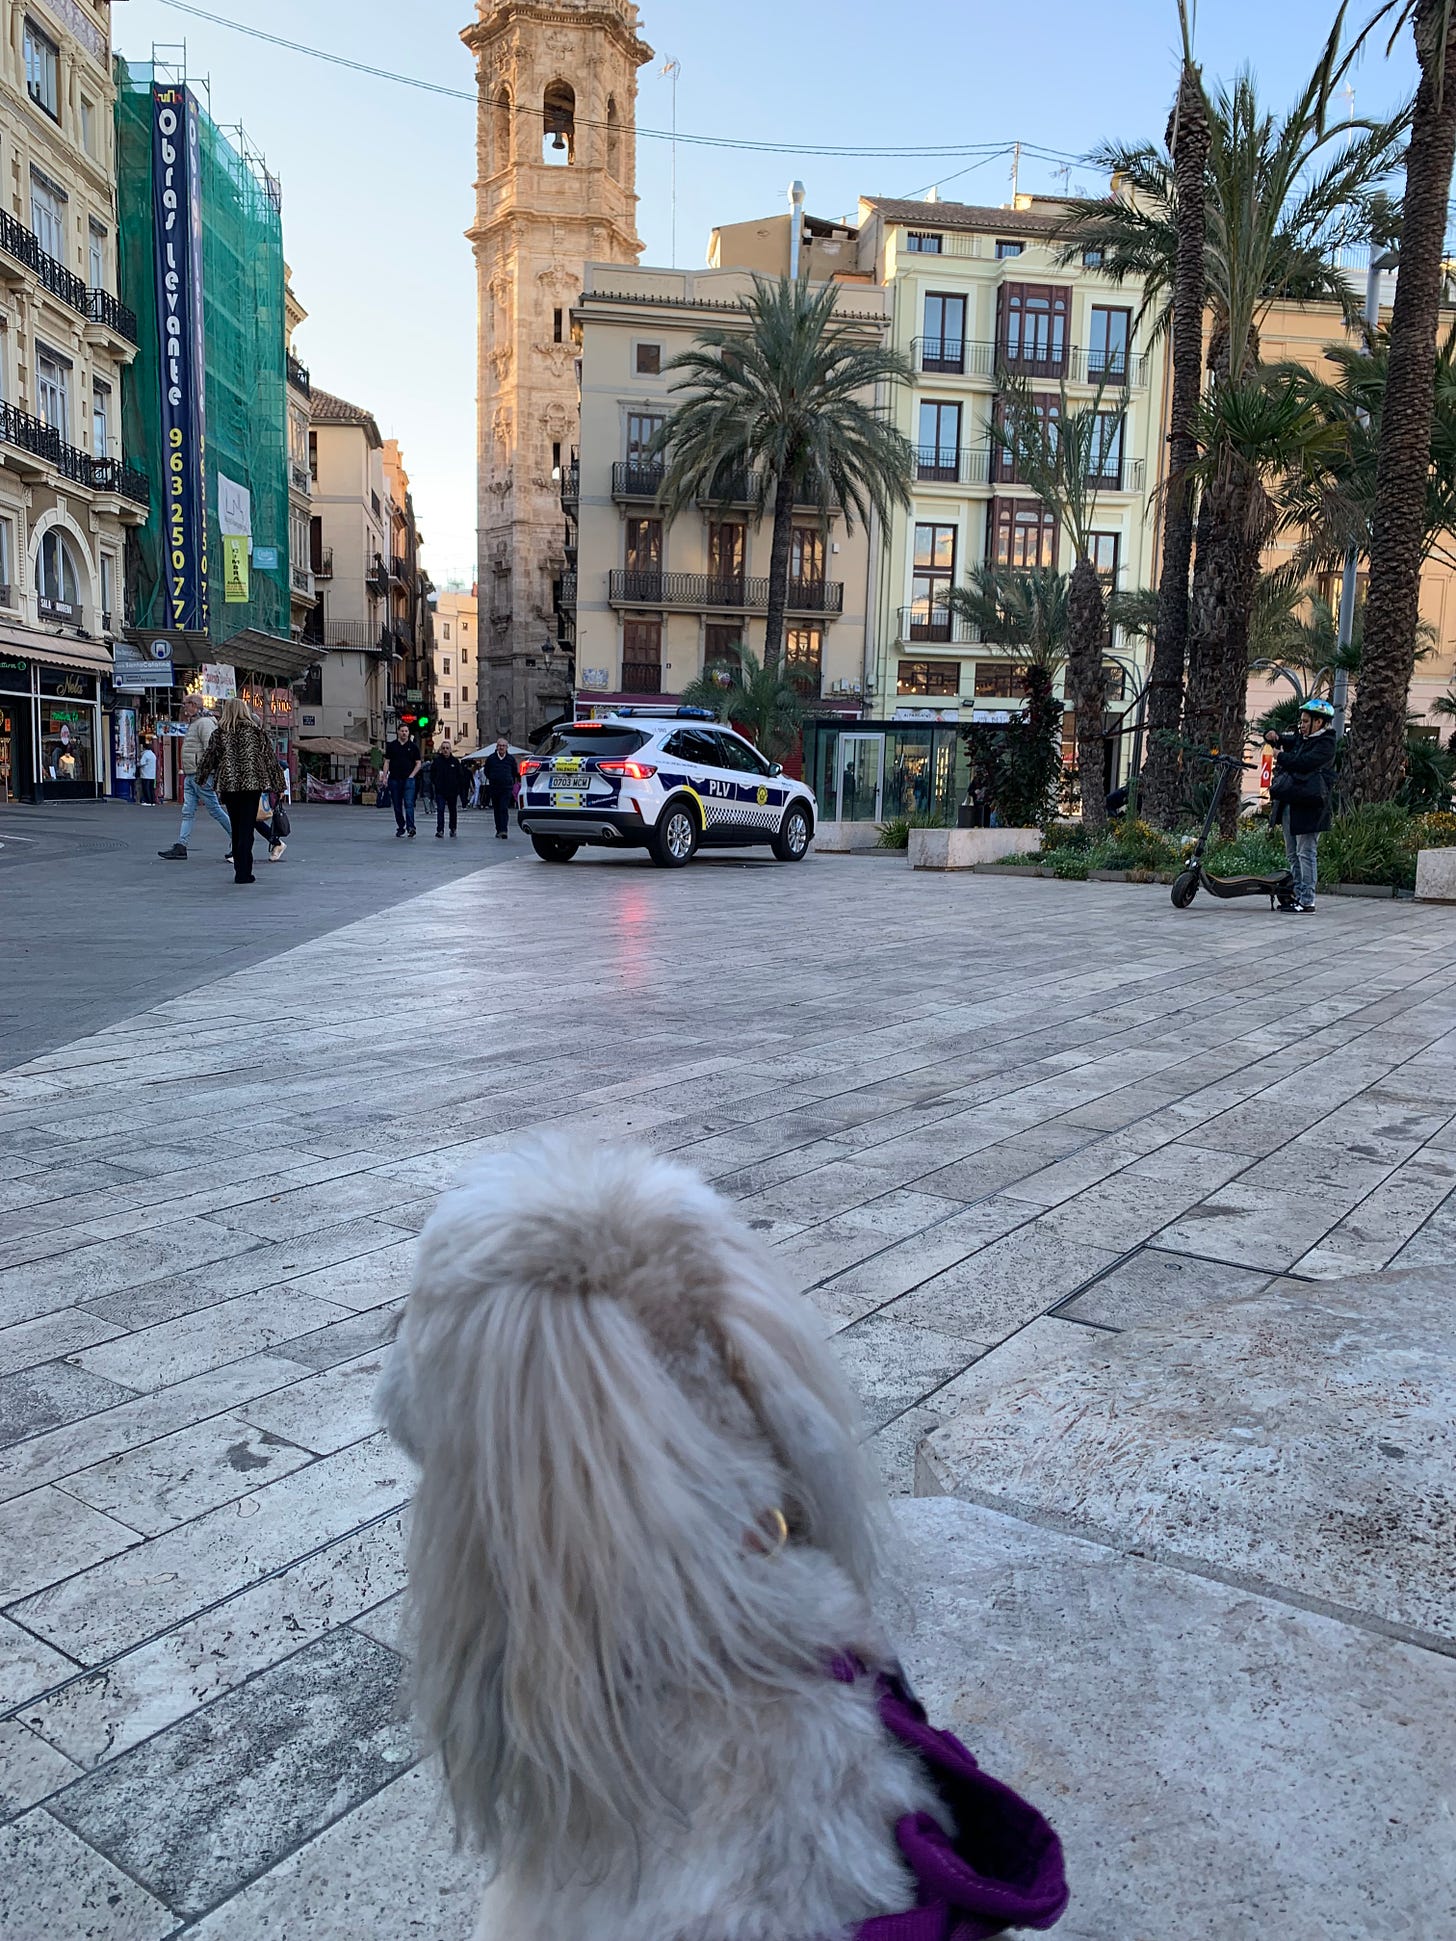 Elsa has her back to the camera as she watches the people walking by at the edge of the Plaza